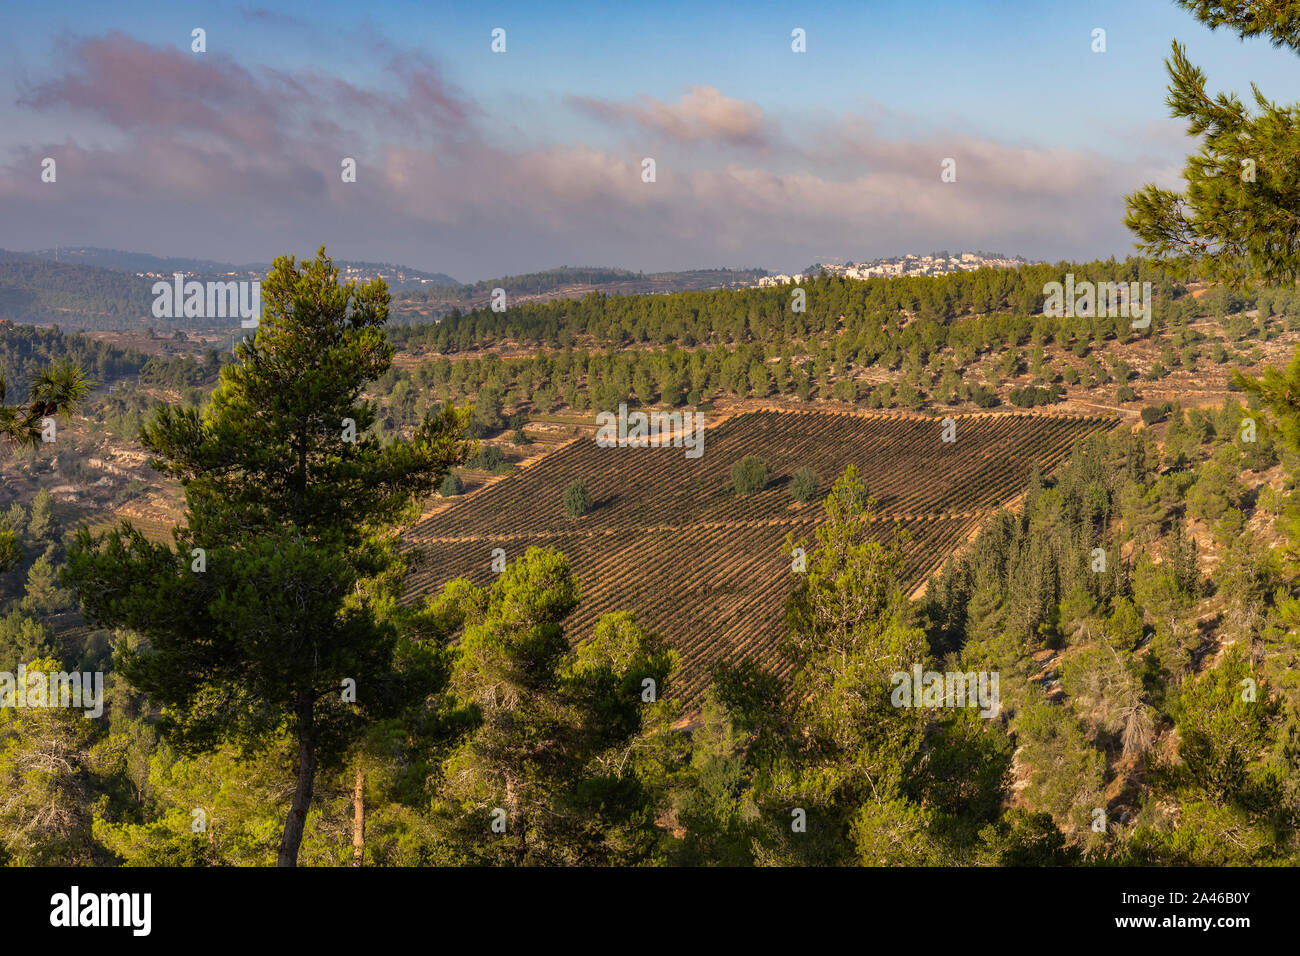 A vineyard among the pine trees of a forest near Jerusalem, Israel Stock Photo